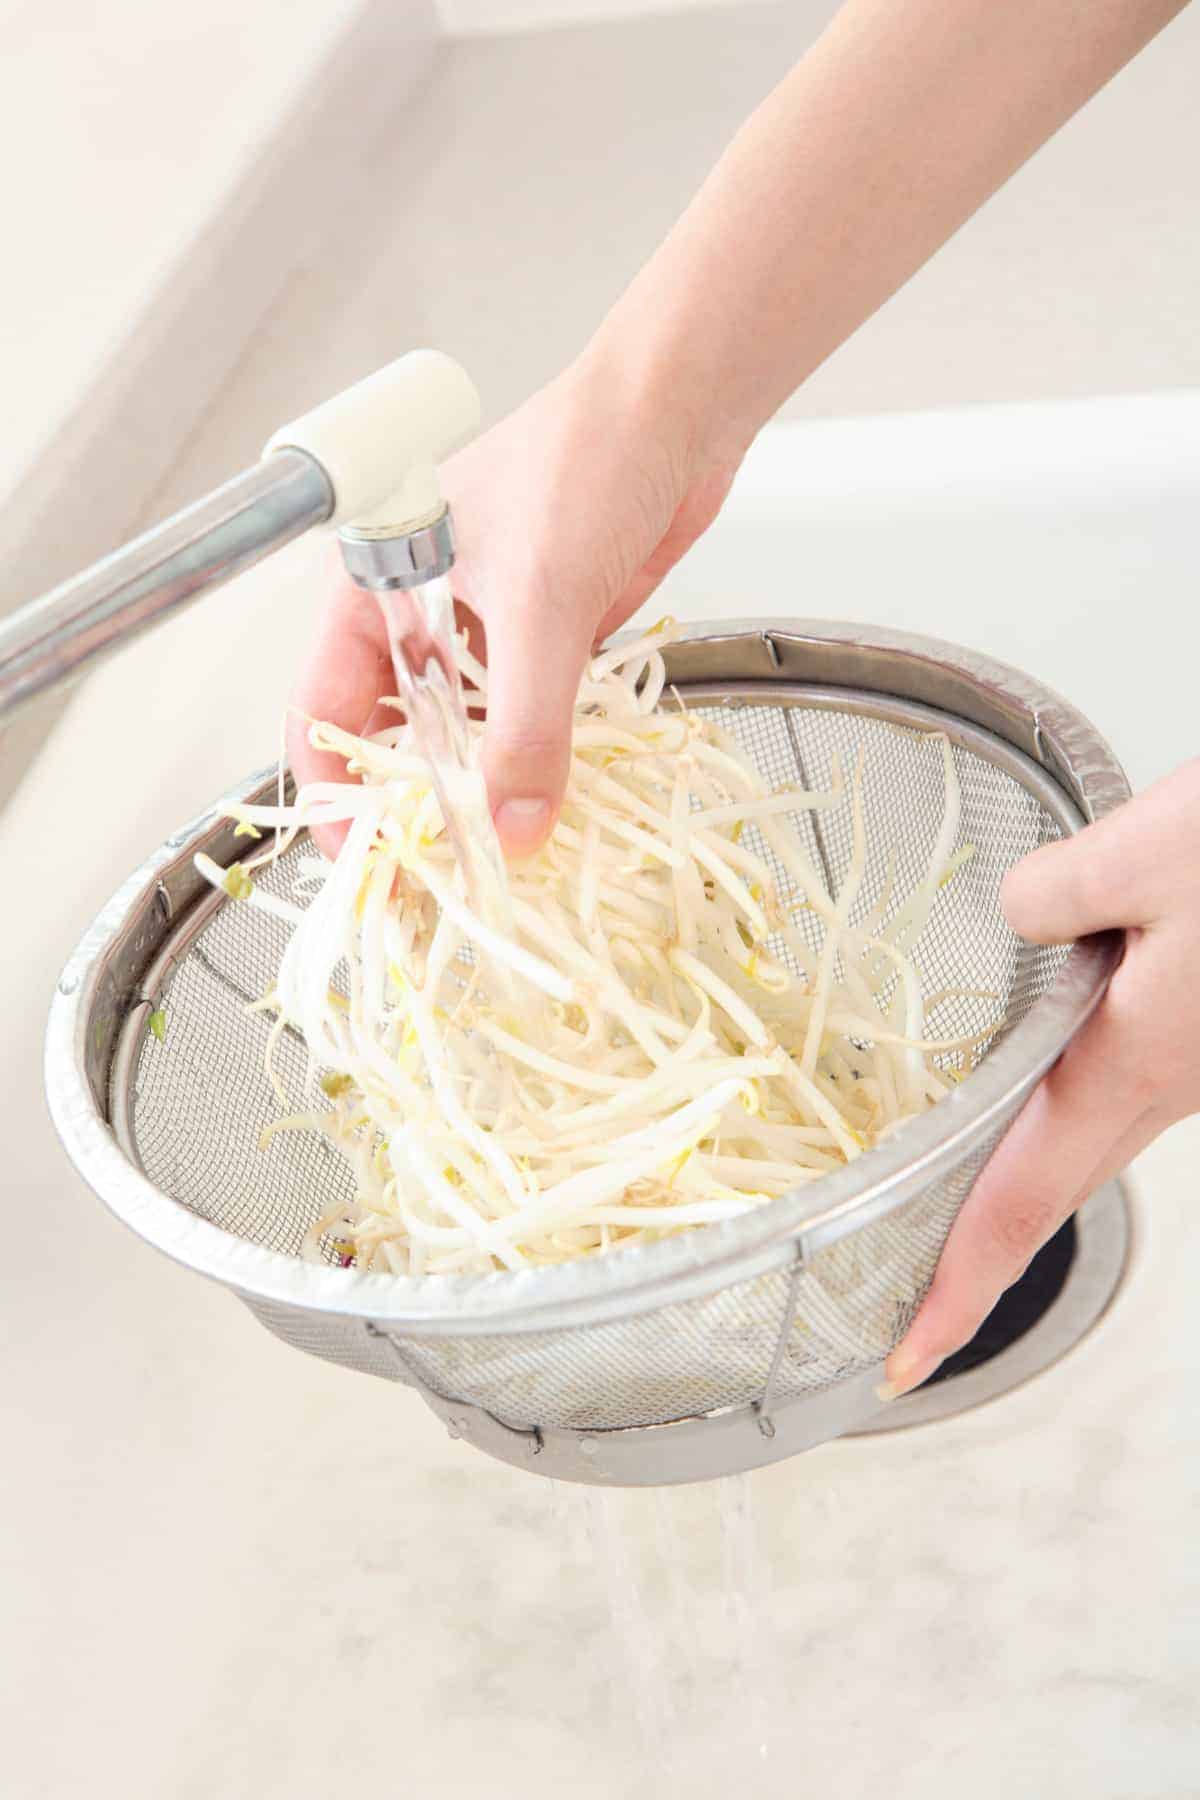 how to keep bean sprouts from going bad, woman washing sprouts